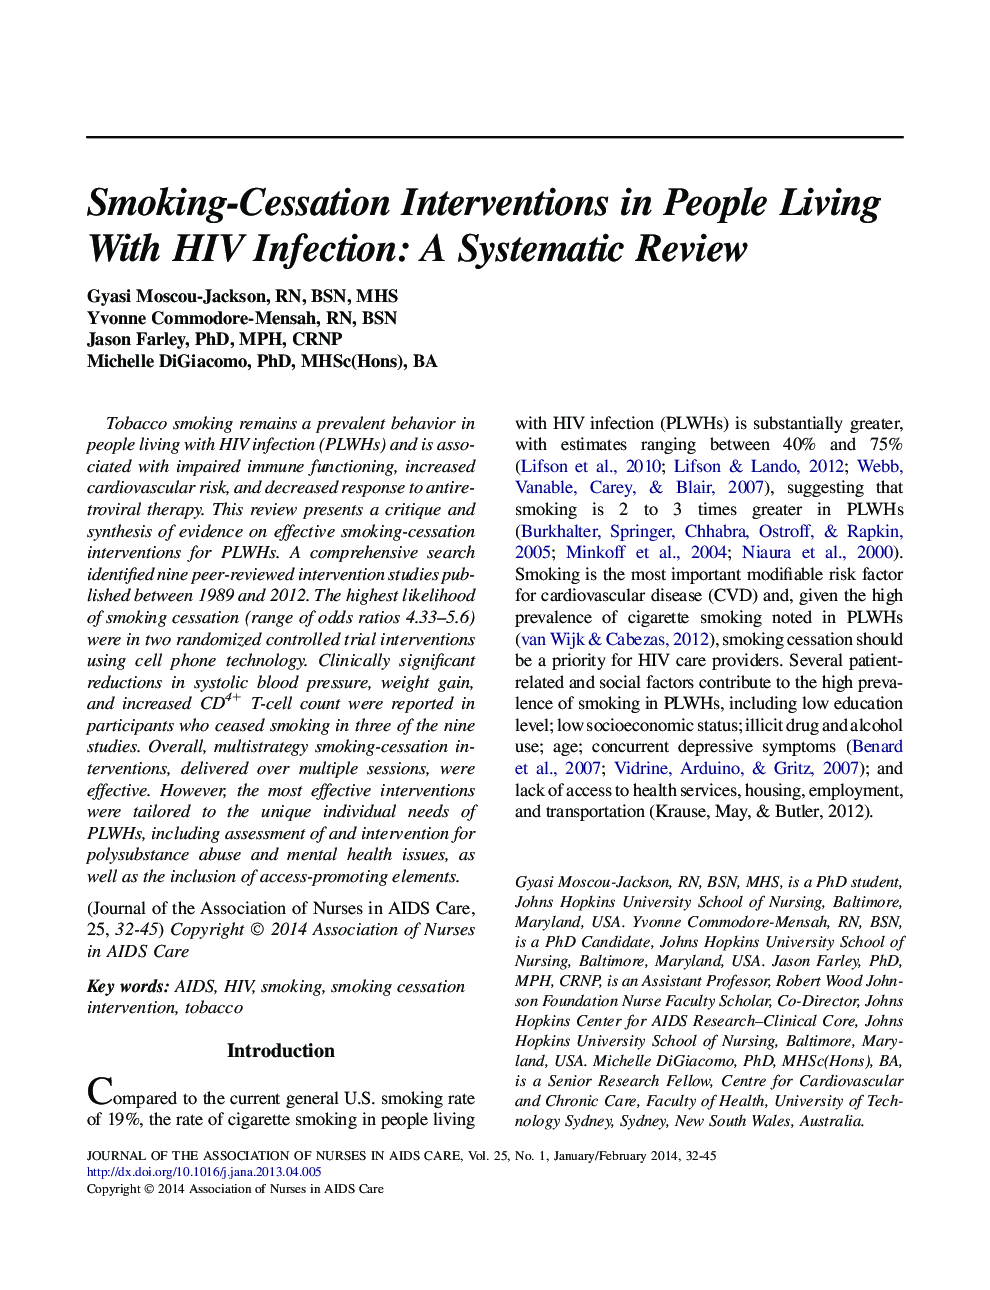 Smoking-Cessation Interventions in People Living With HIV Infection: A Systematic Review